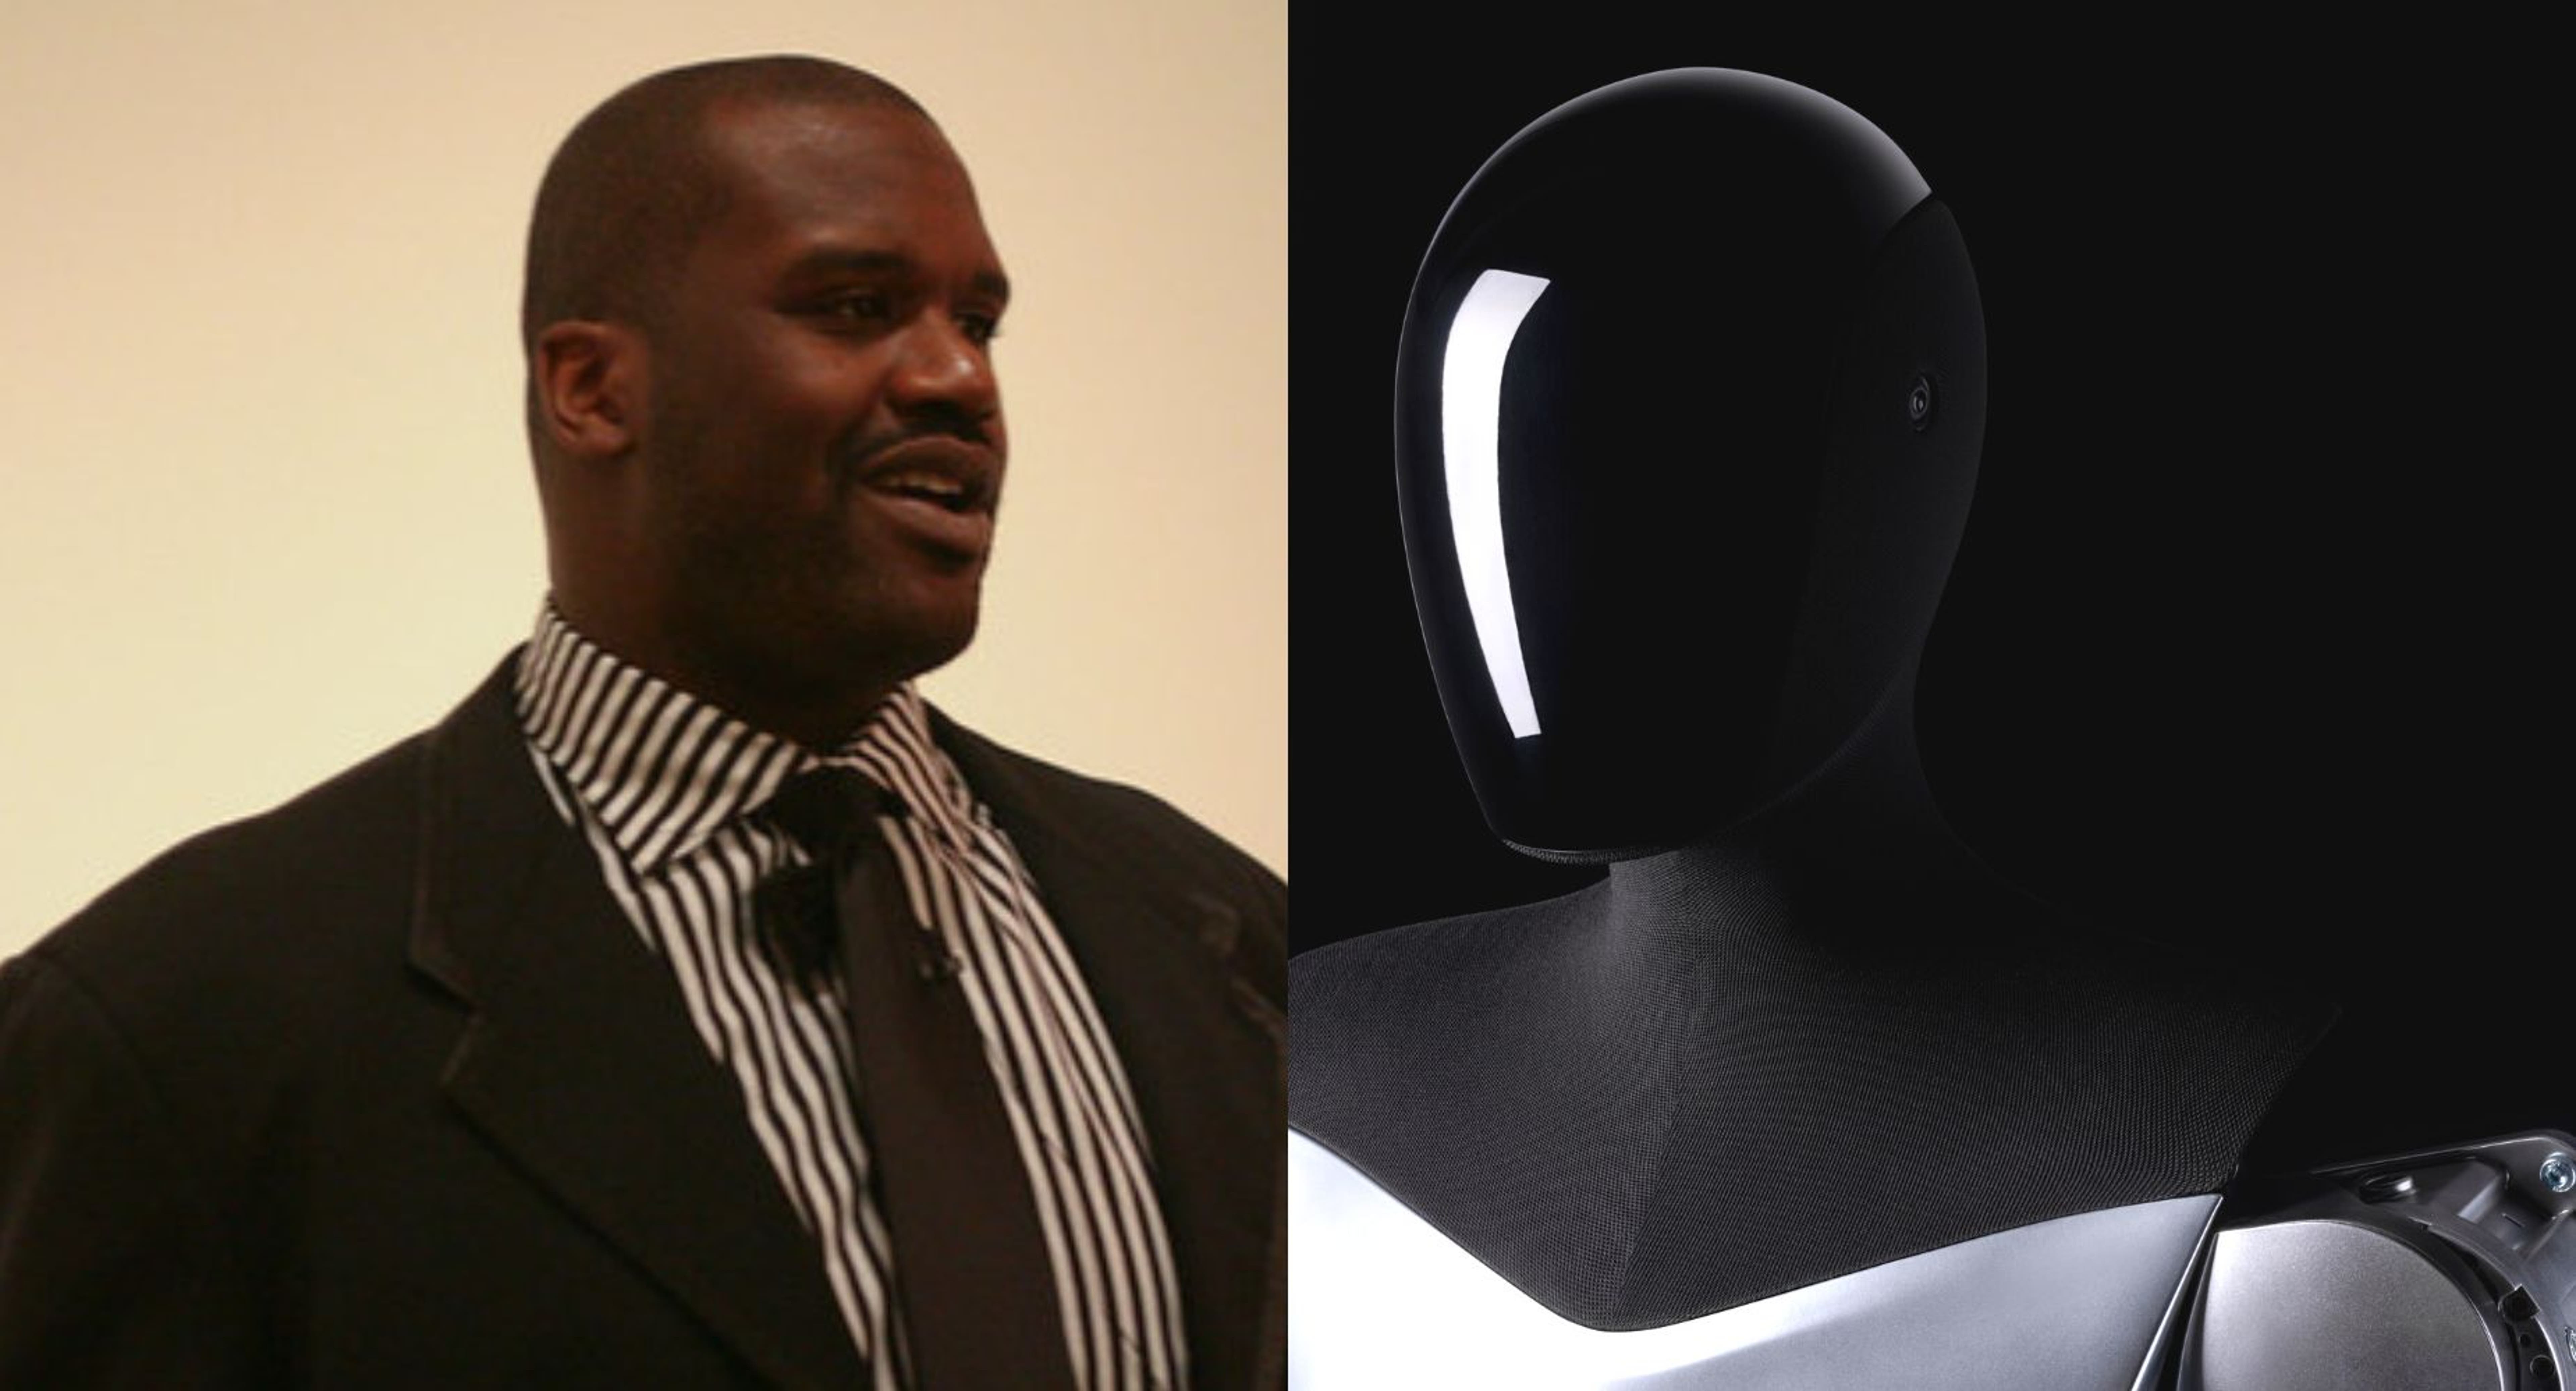 &#39;Can I Purchase A Robot&#39;: NBA Hall of Famer Wants A Tesla Bot, Will Elon Musk Help Him Out?